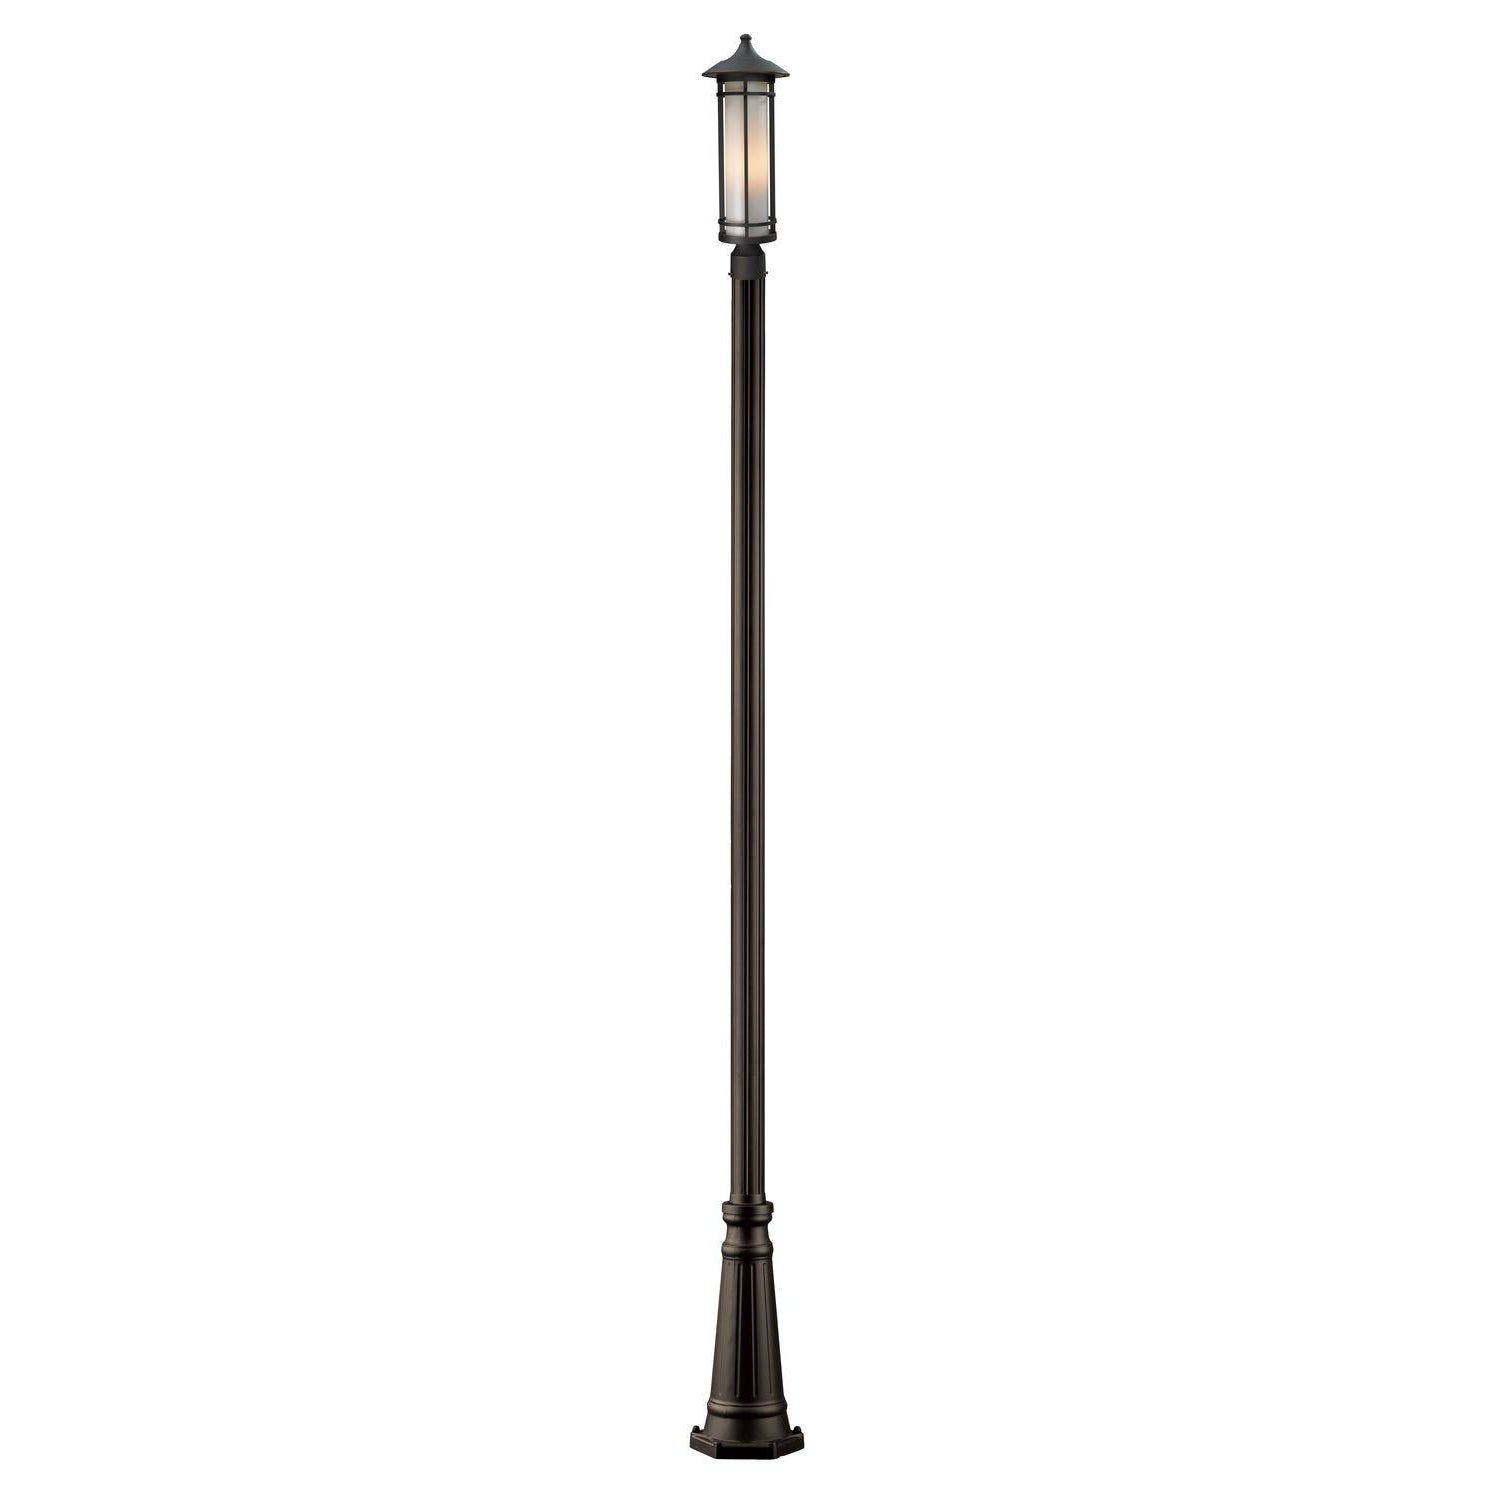 Woodland Post Light Oil Rubbed Bronze